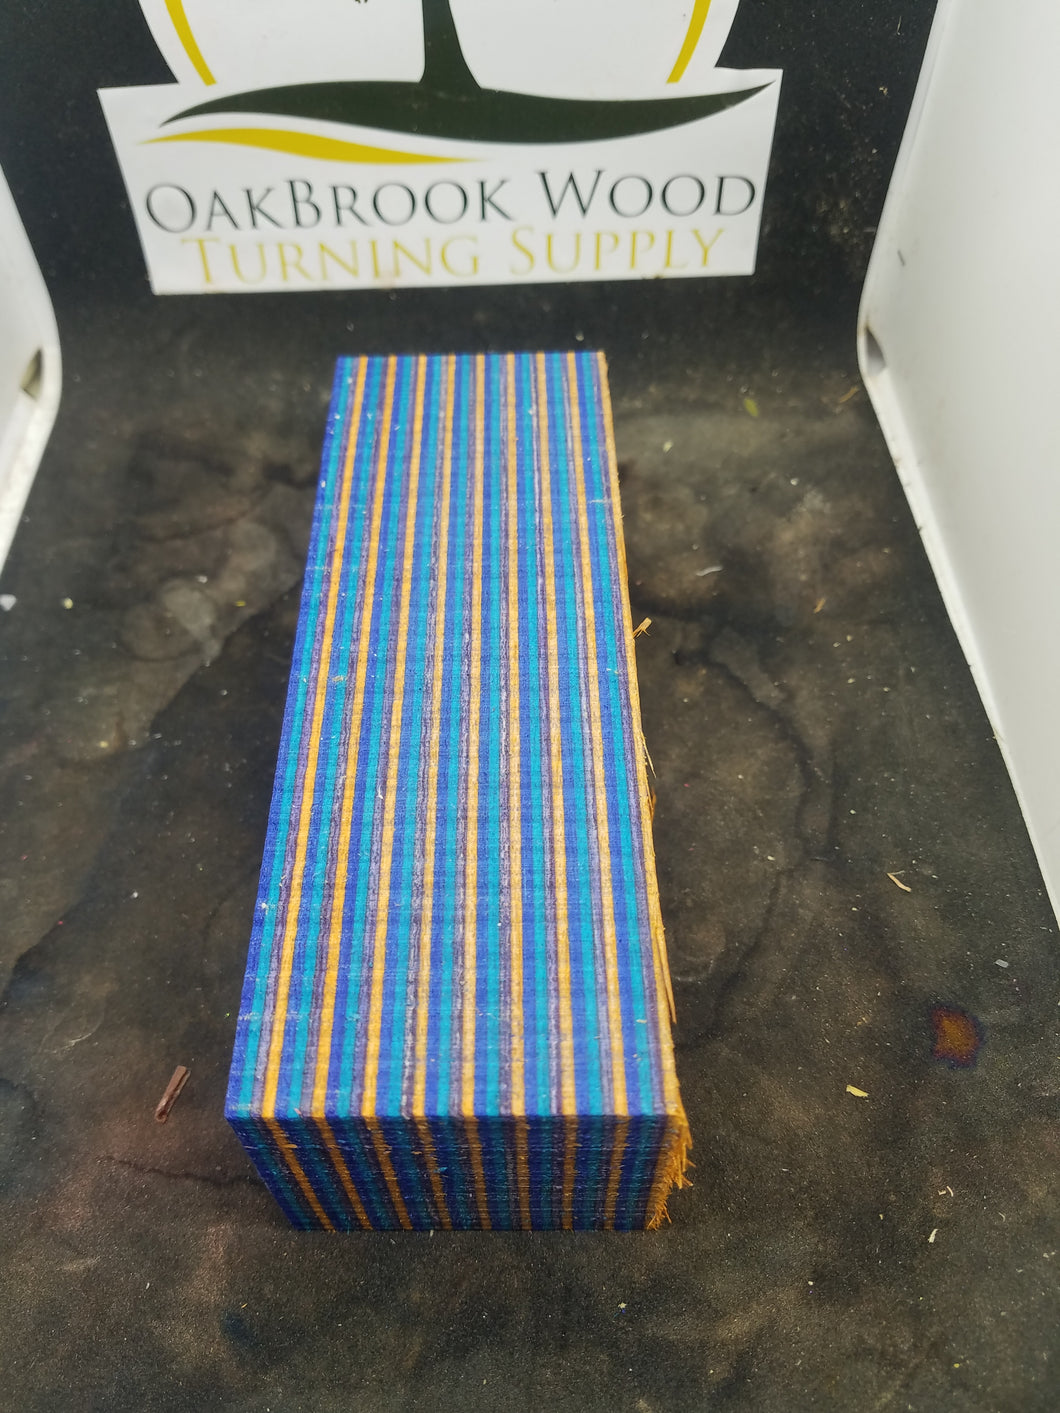 Spectraply Gemwood - Oakbrook Wood Turning Supply